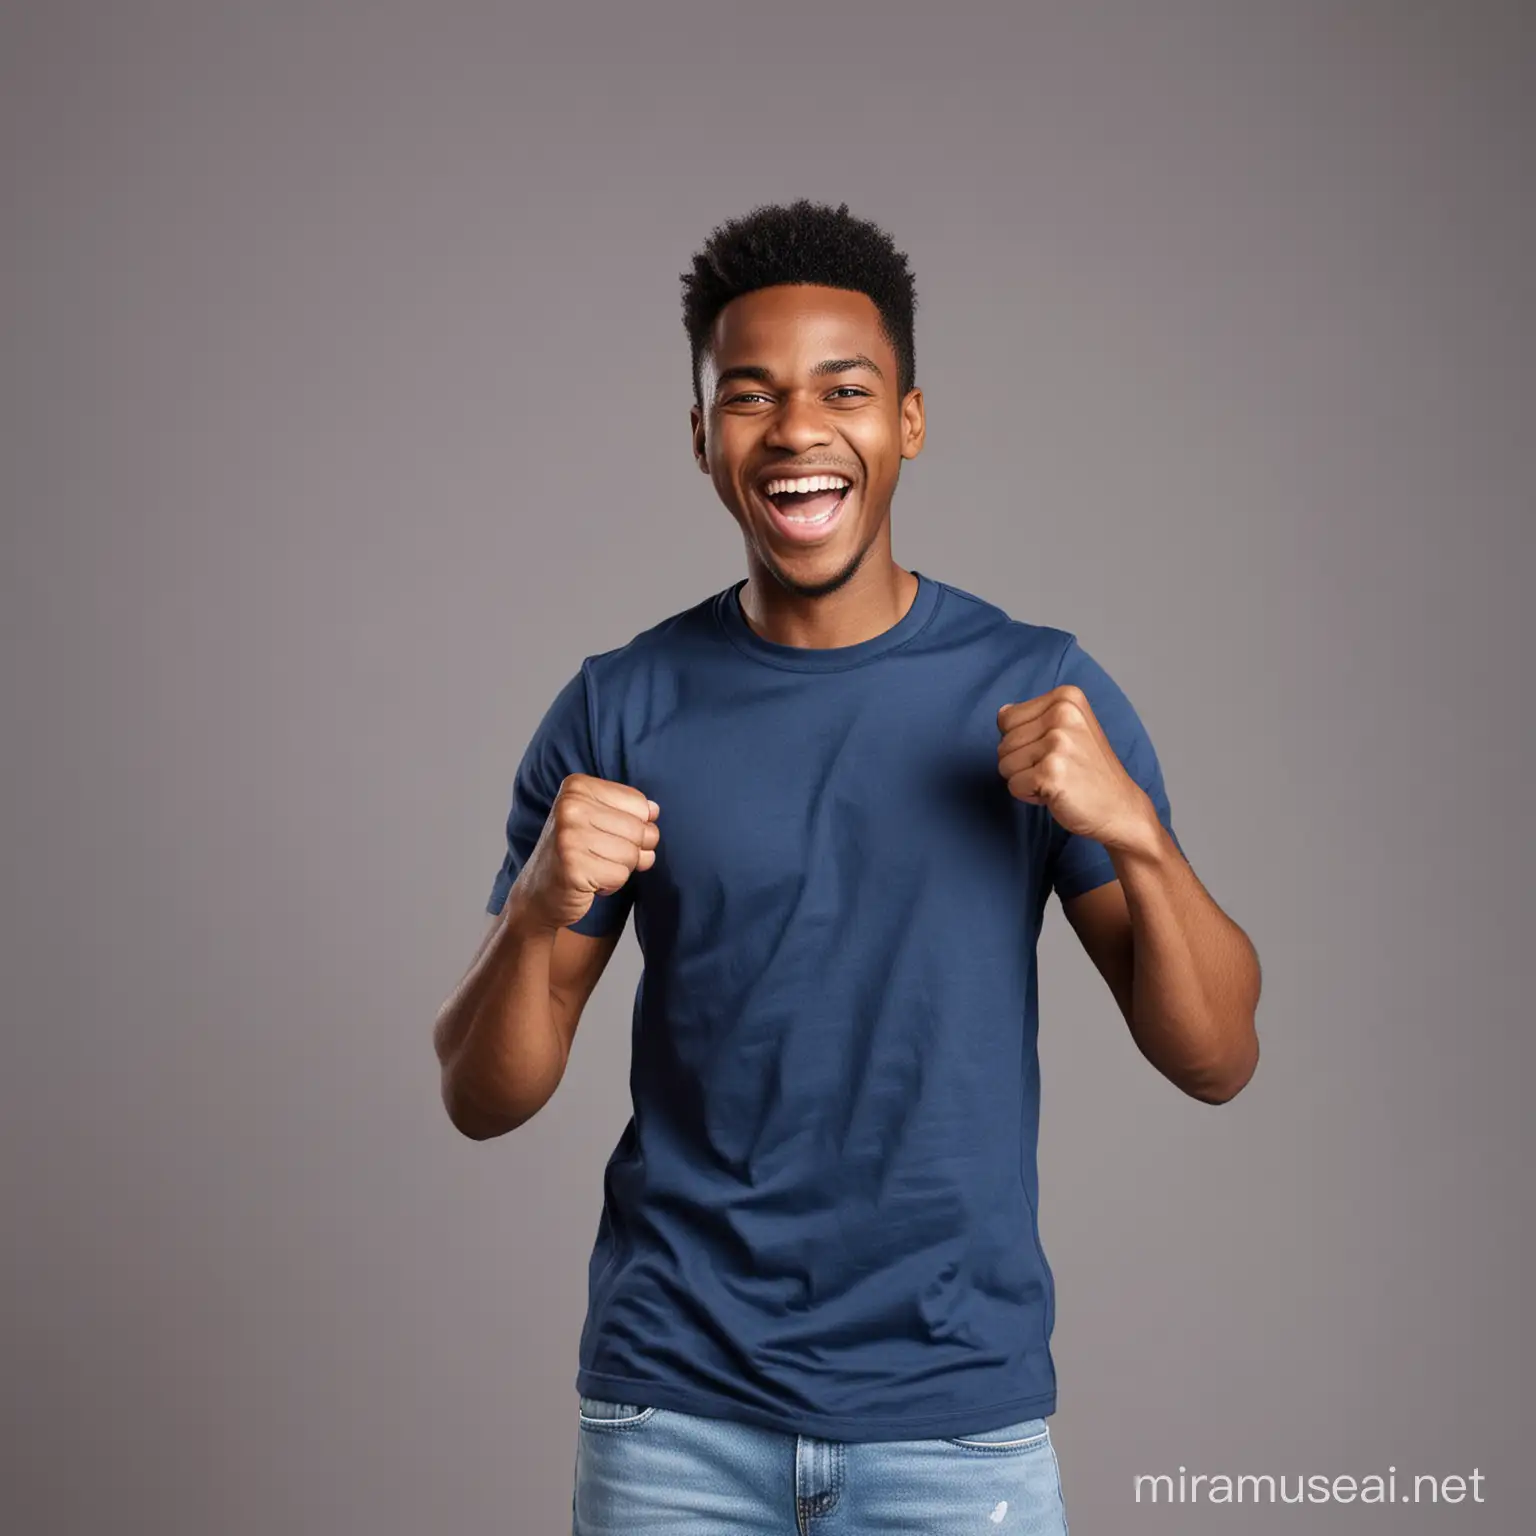 Excited African American Man Laughing and Raising Fist in Dark Blue TShirt